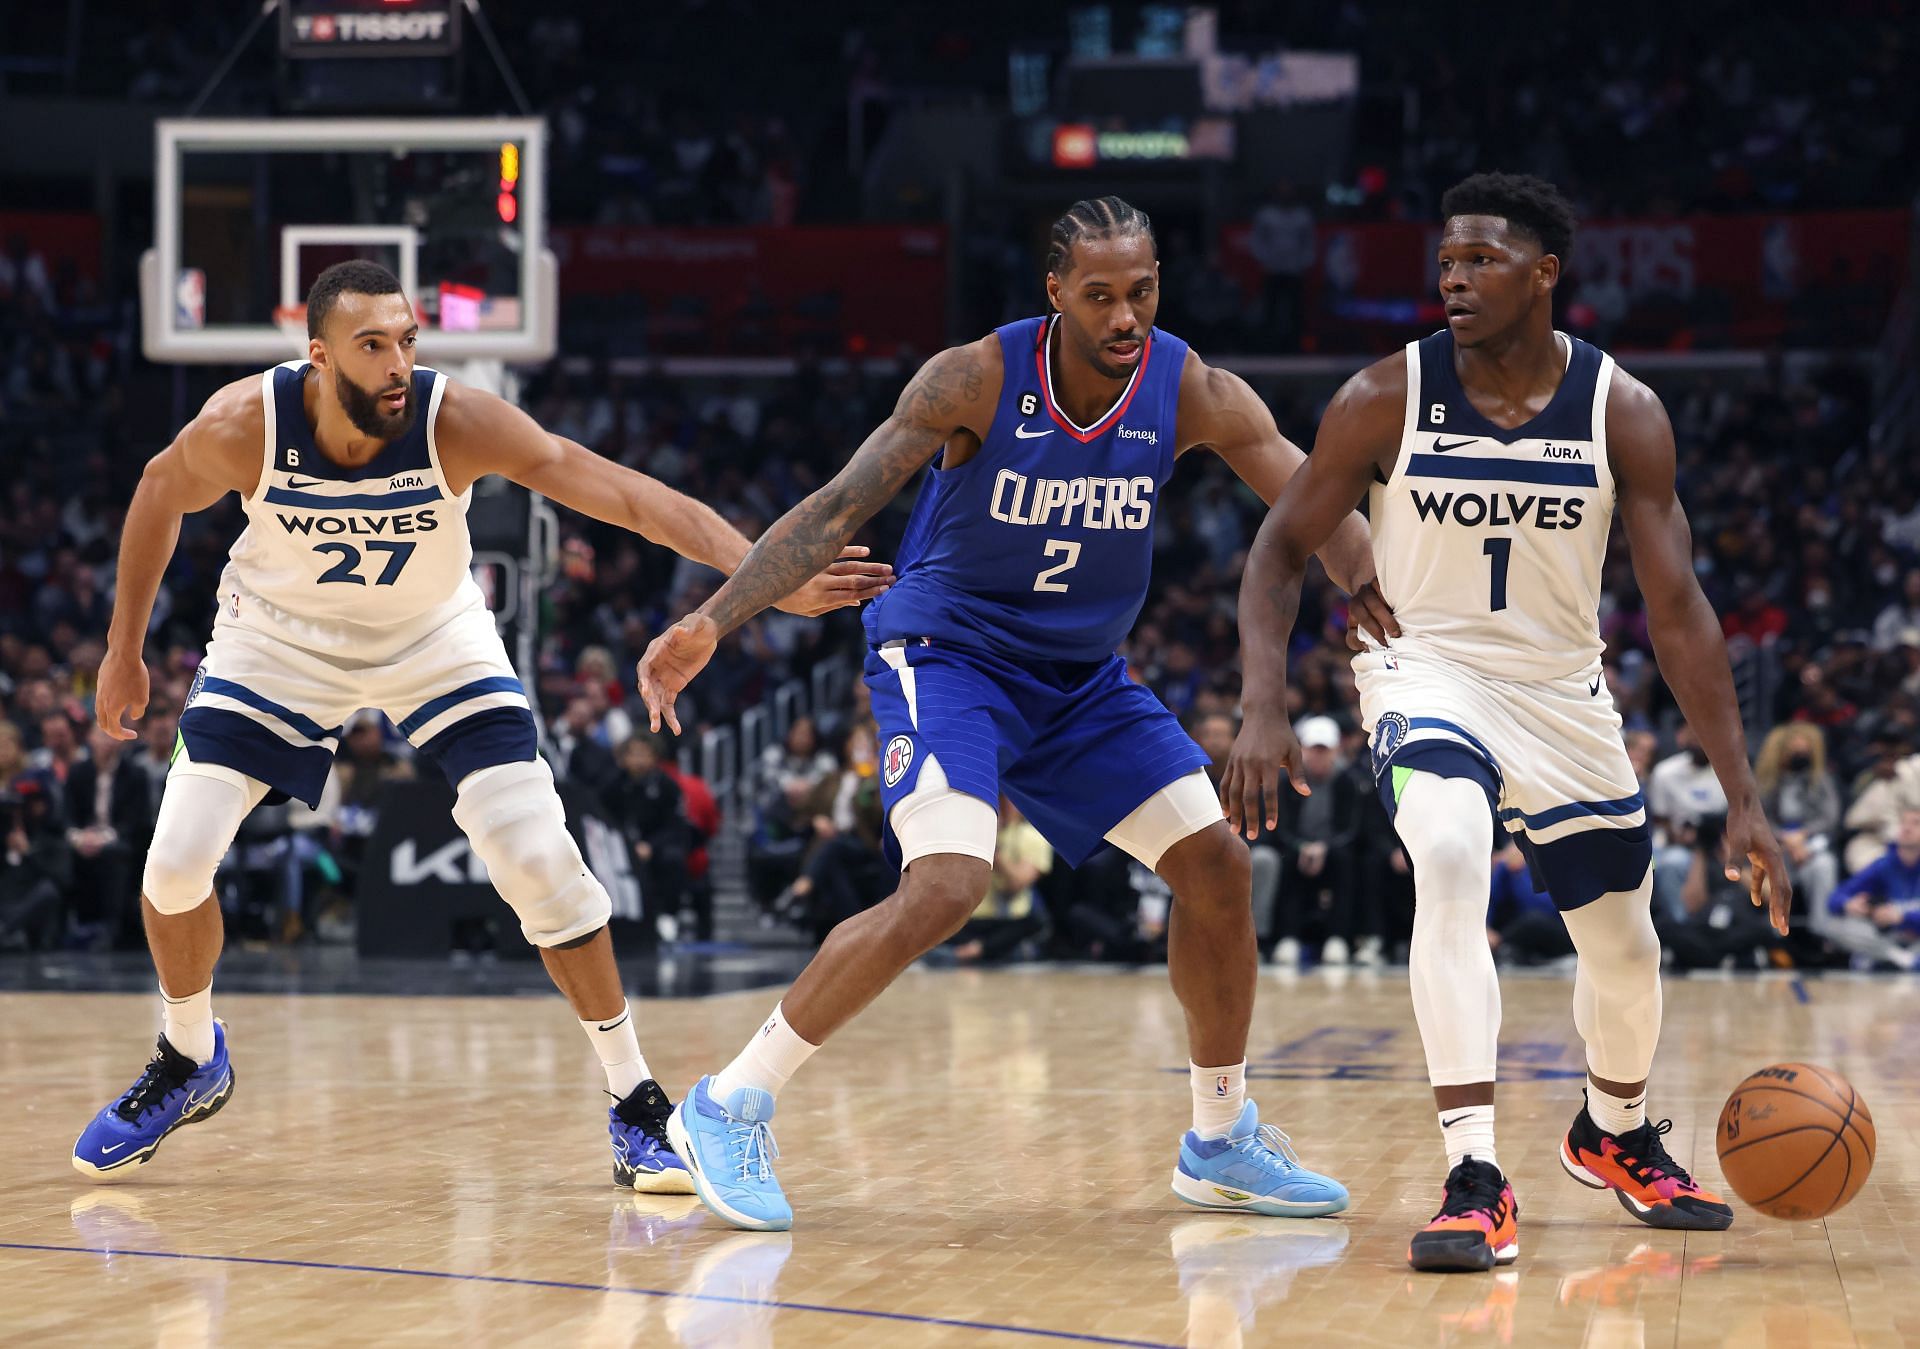 Minnesota Timberwolves vs LA Clippers Game Player Stats and Box Scores